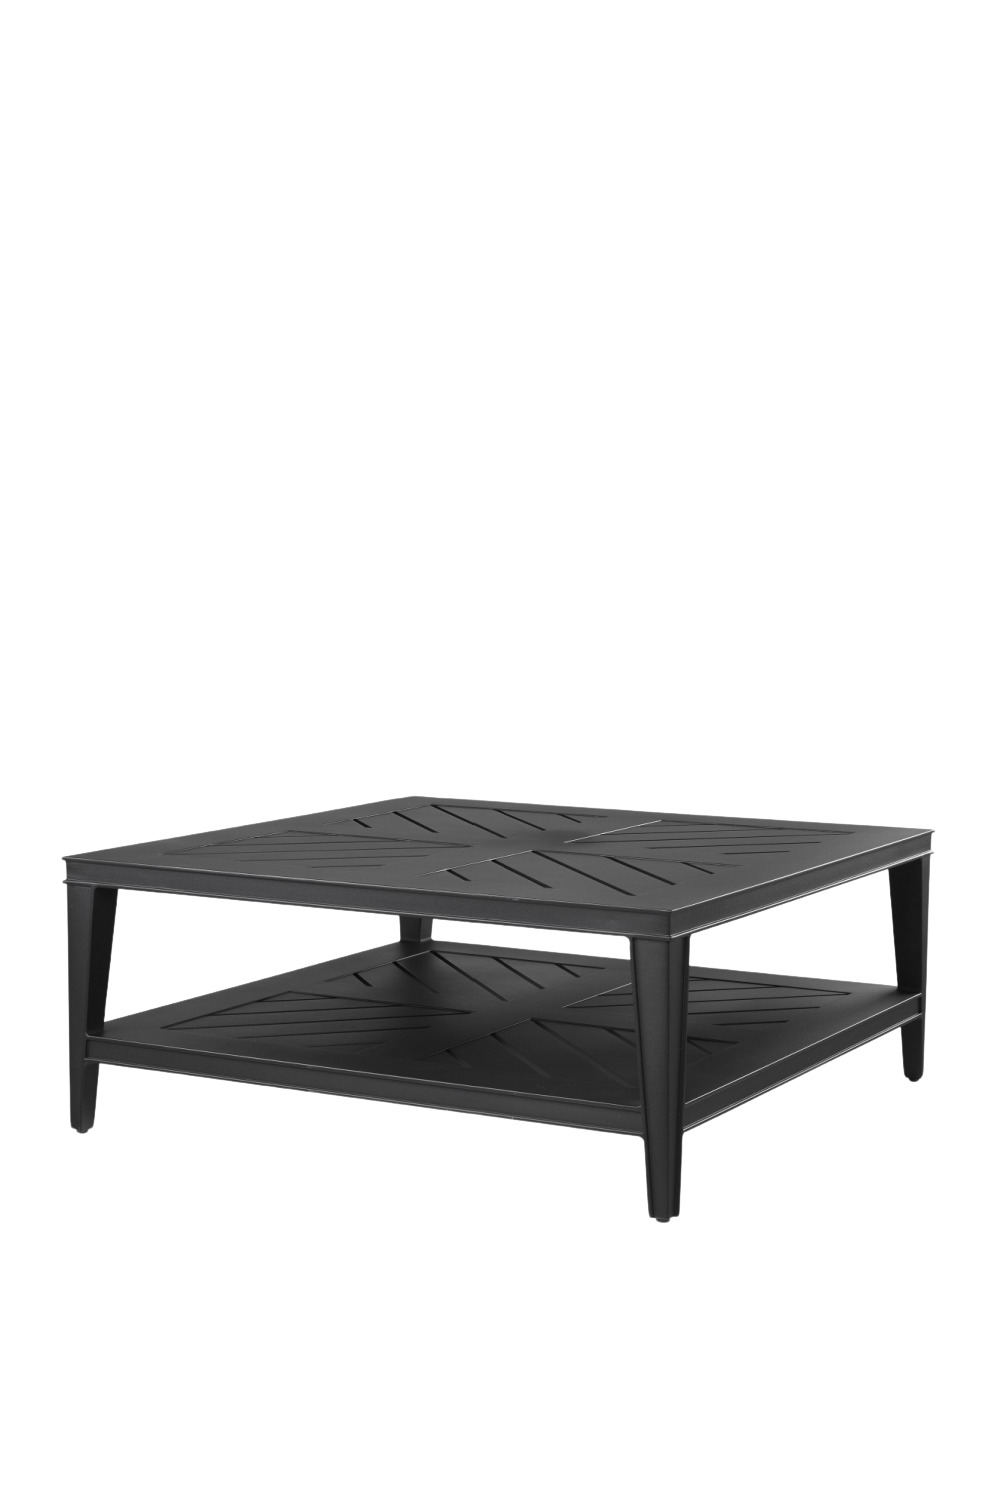 Black Square Outdoor Coffee Table | Eichholtz Bell Rive | Oroa.com